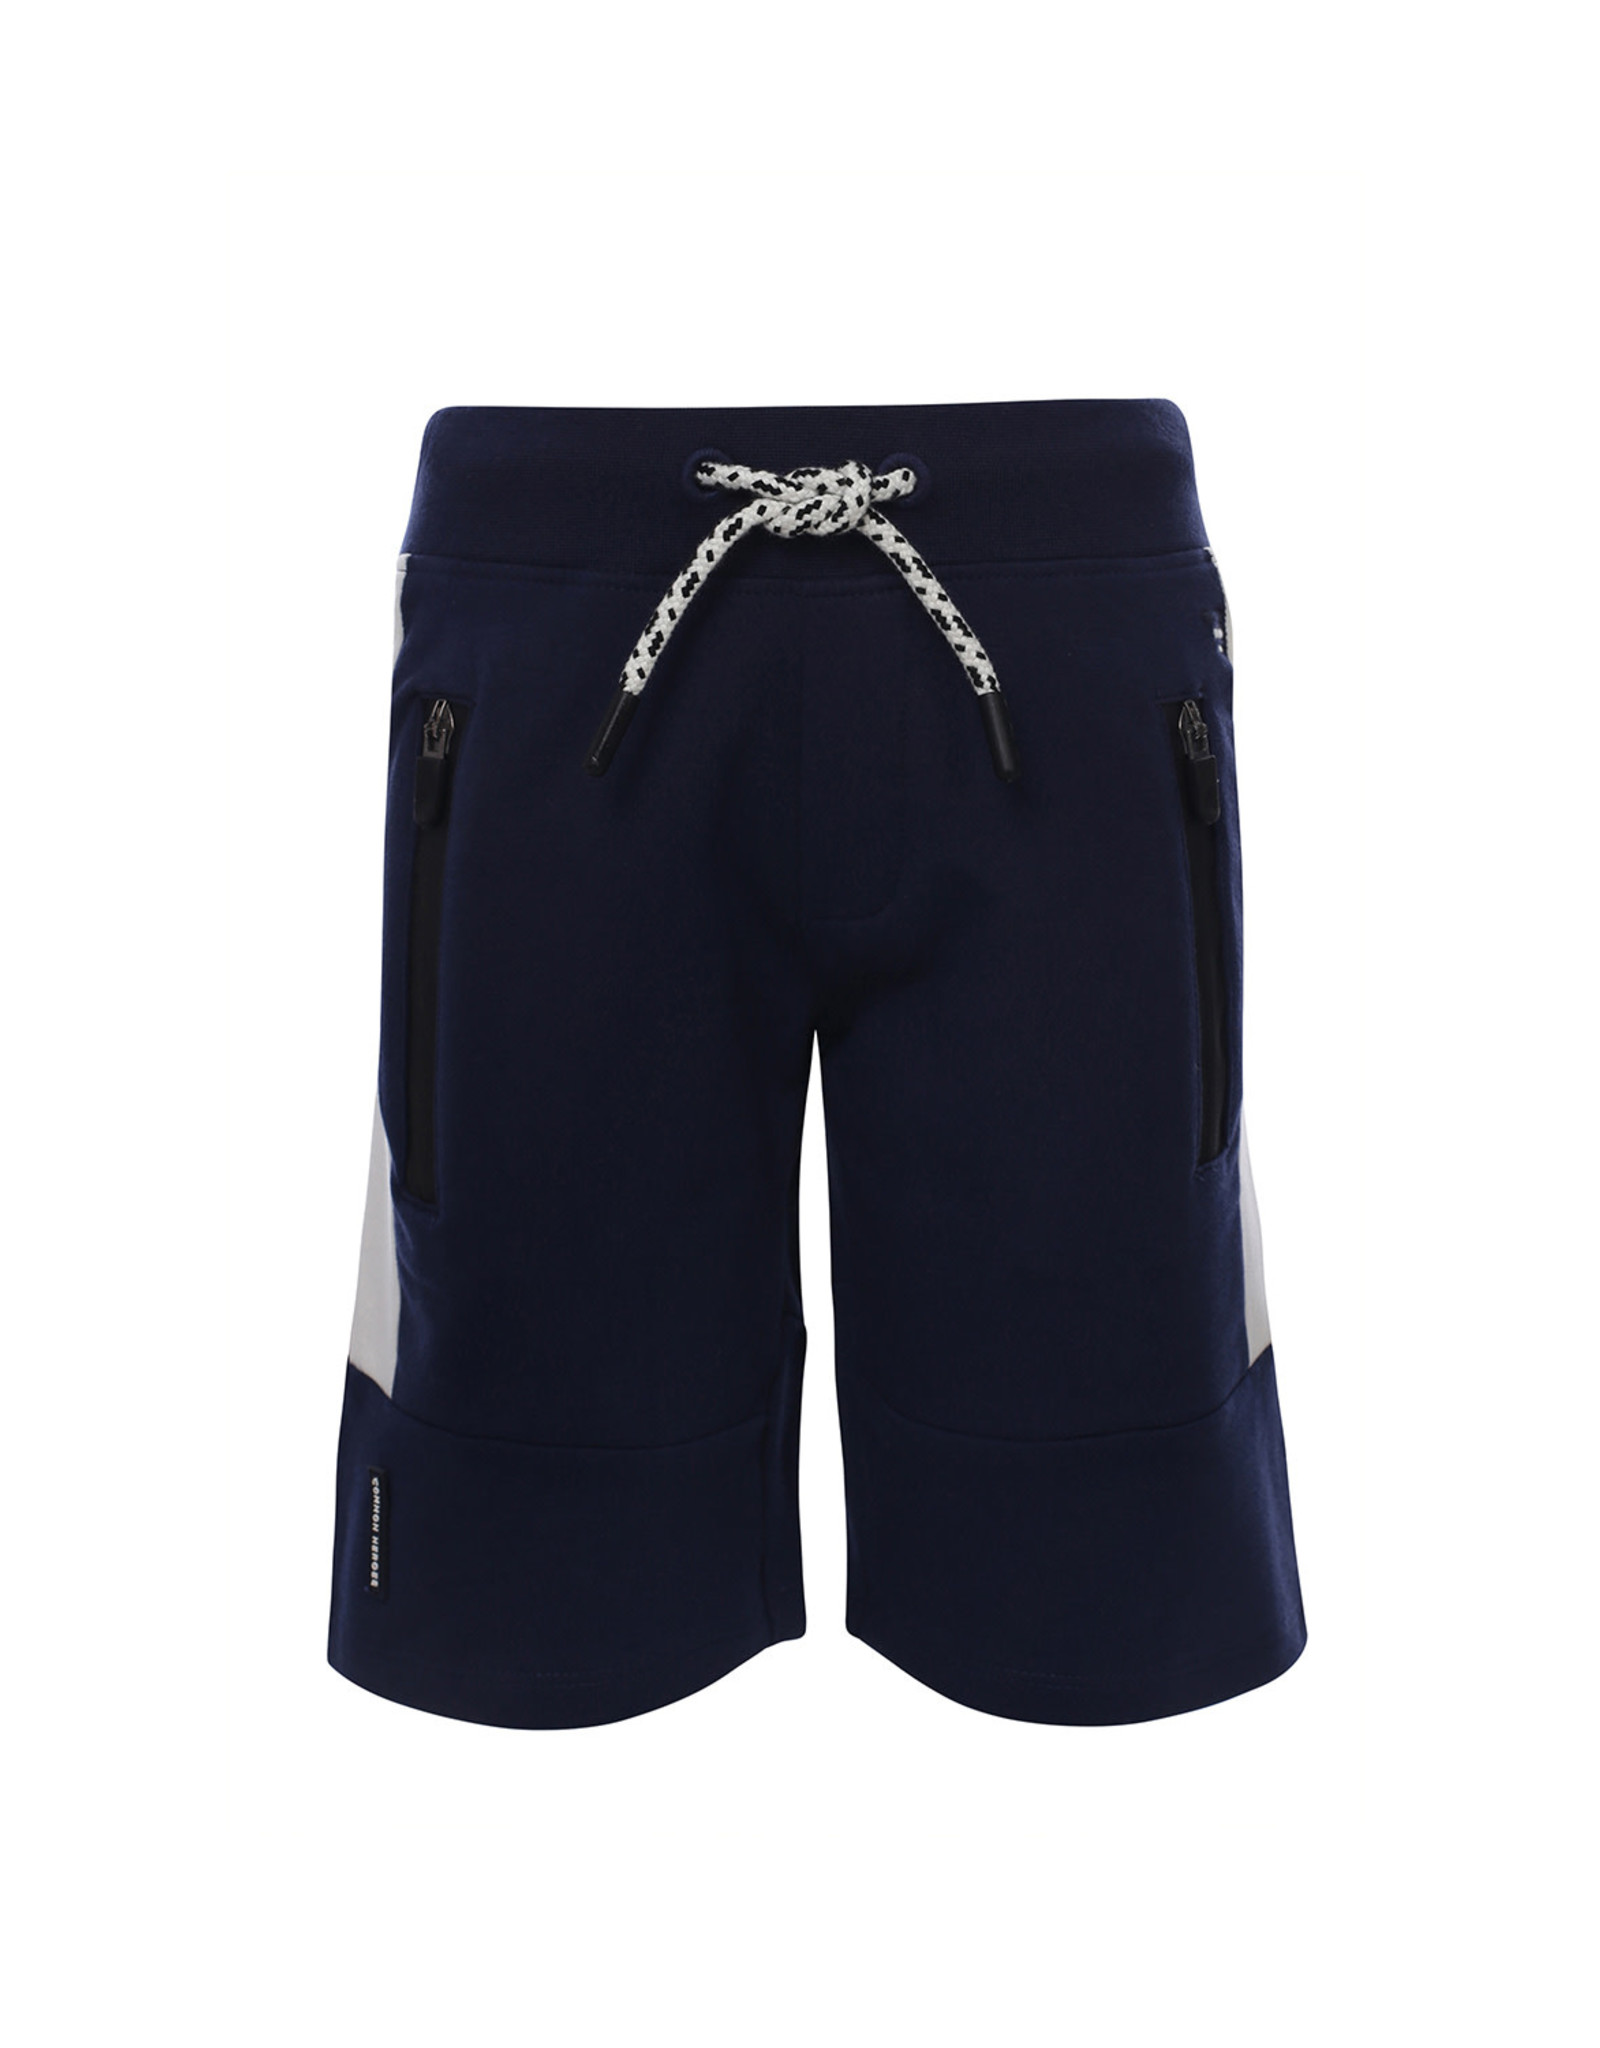 Common Heroes Common Heroes sweat shorts Blue z23